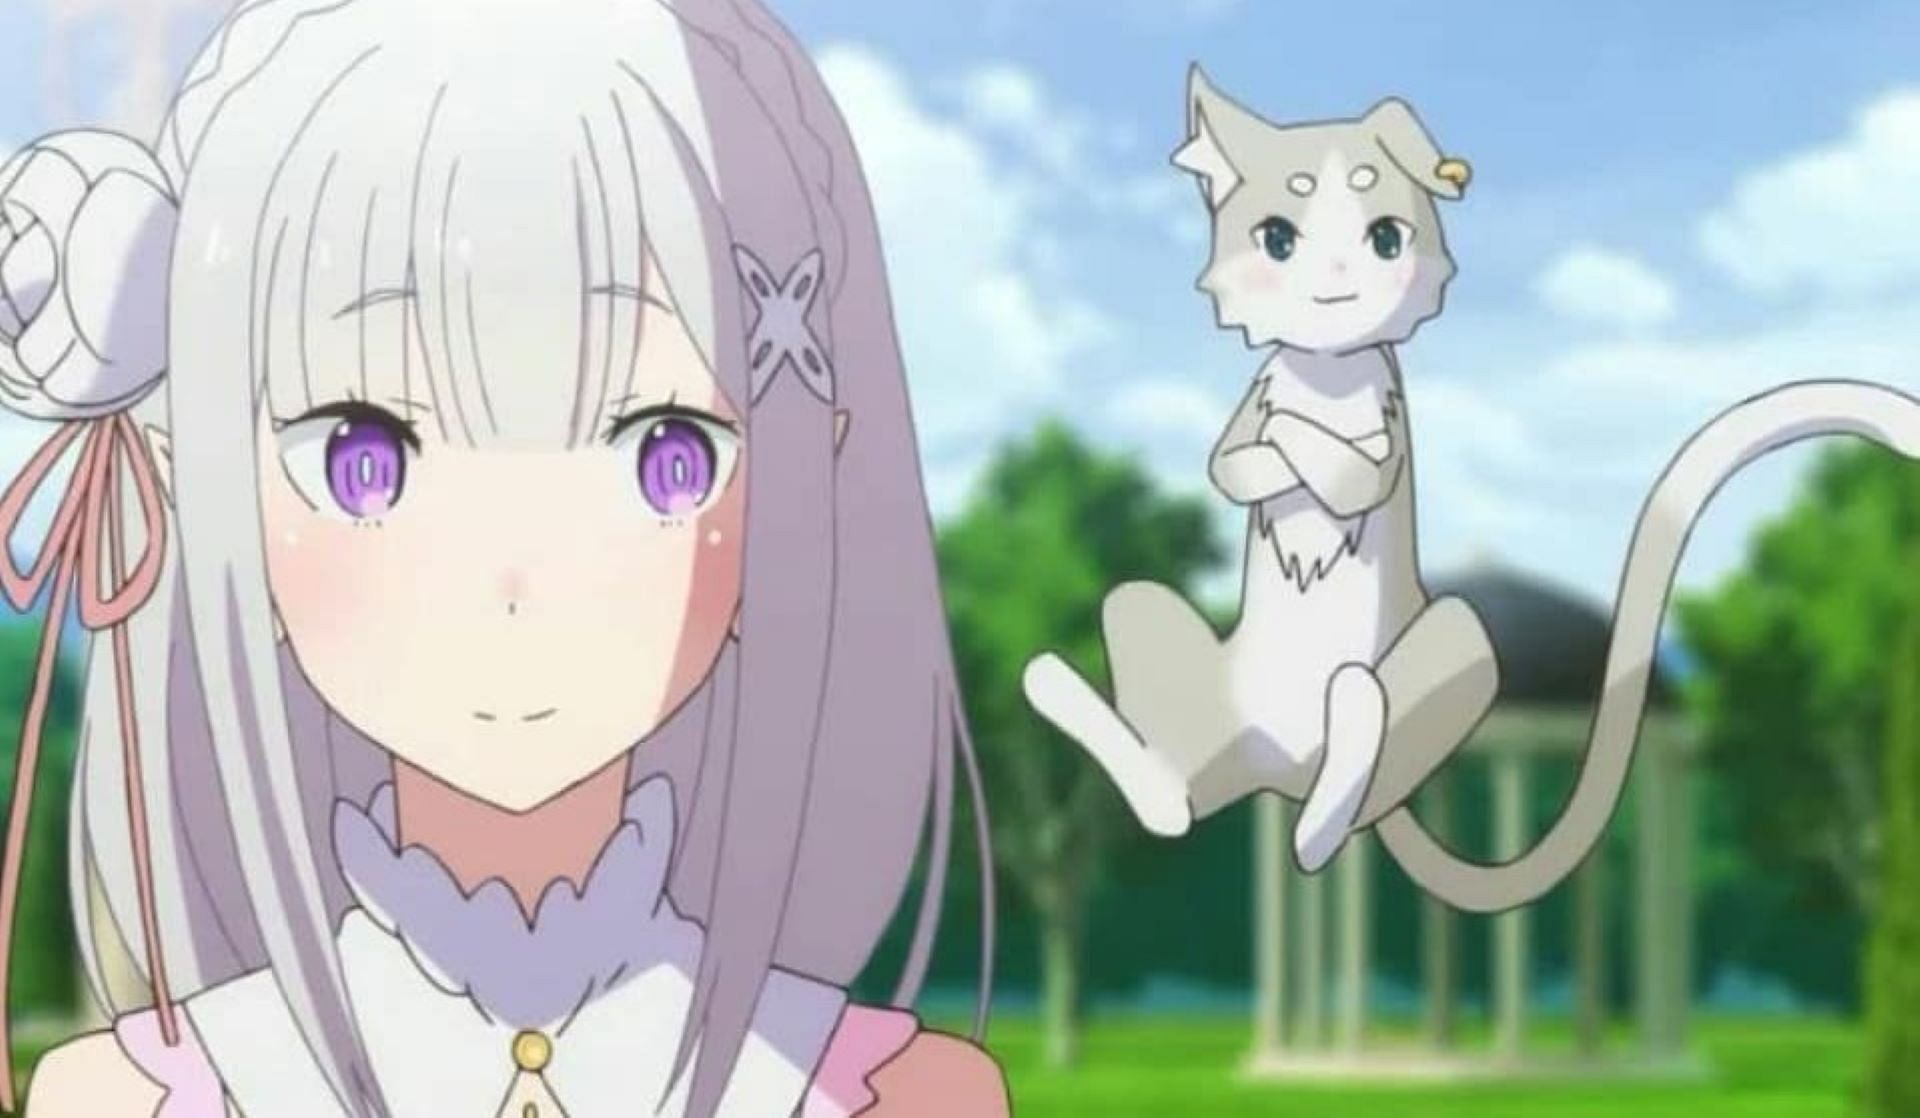 Emilia and Puck, as seen in the anime (Image White Fox)